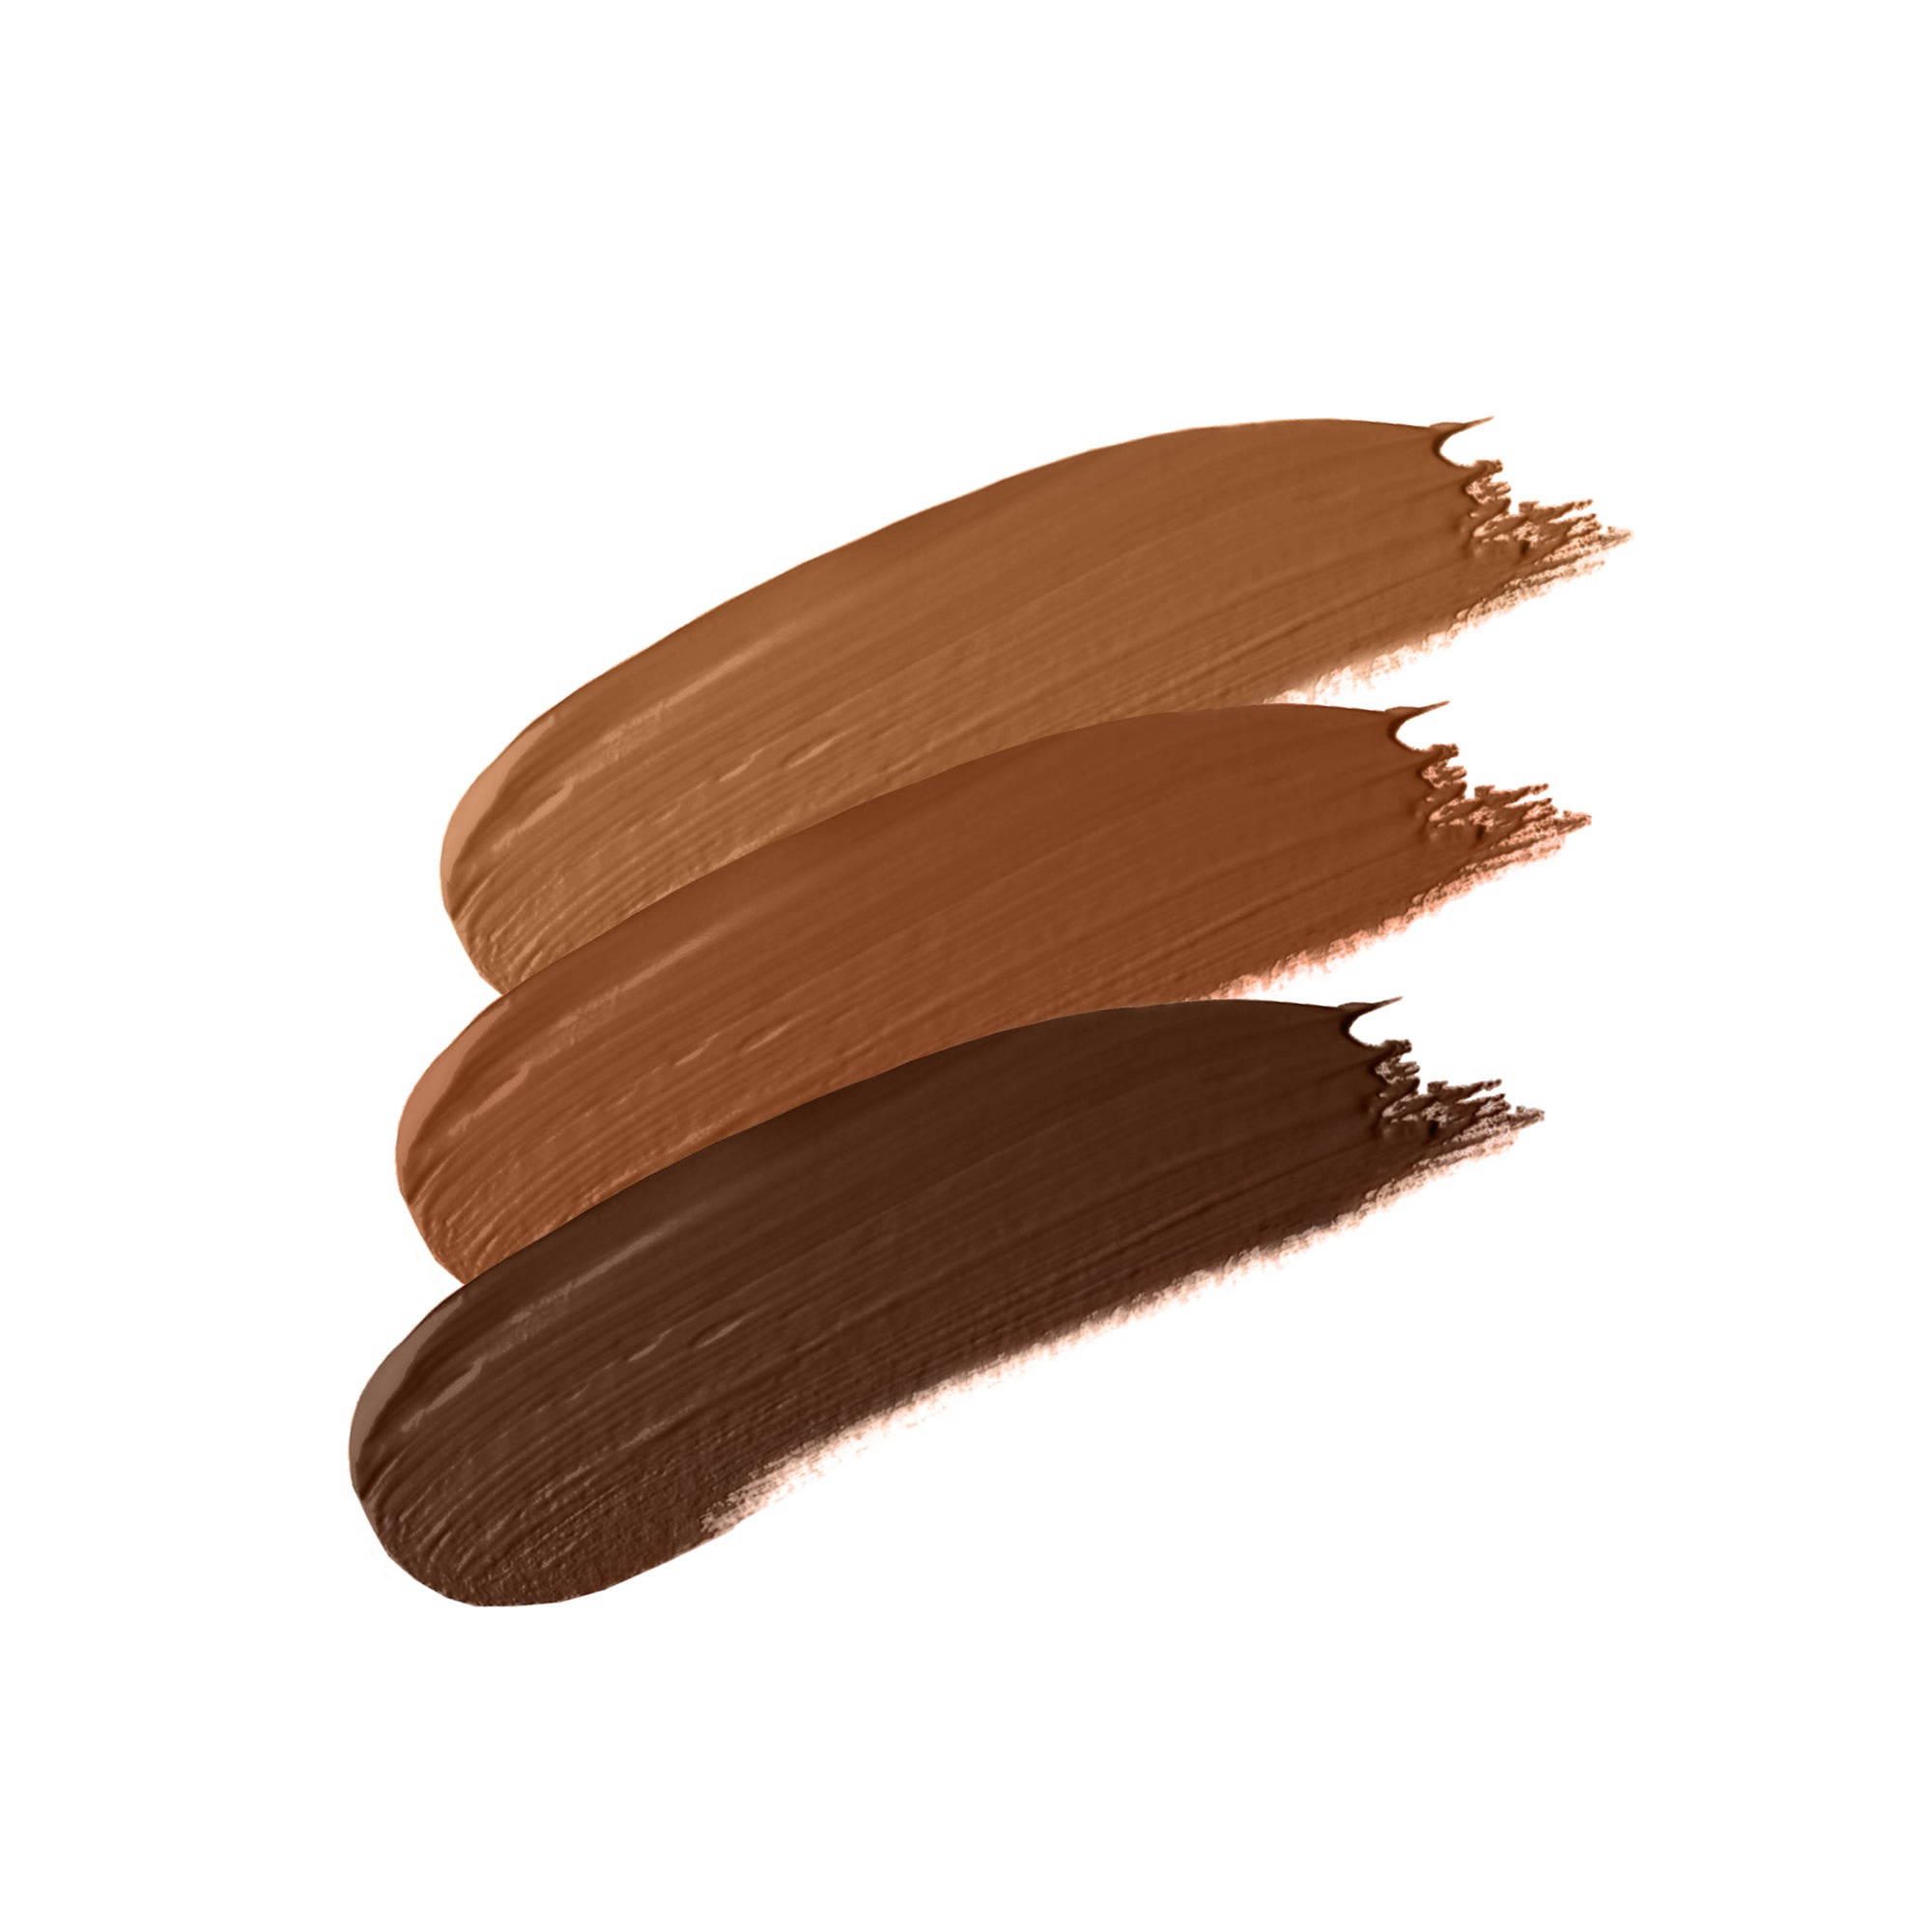 8 - DEEP BROWN - buildable, creamy, hydrating concealer in deep brown undertone shade eight in group shot